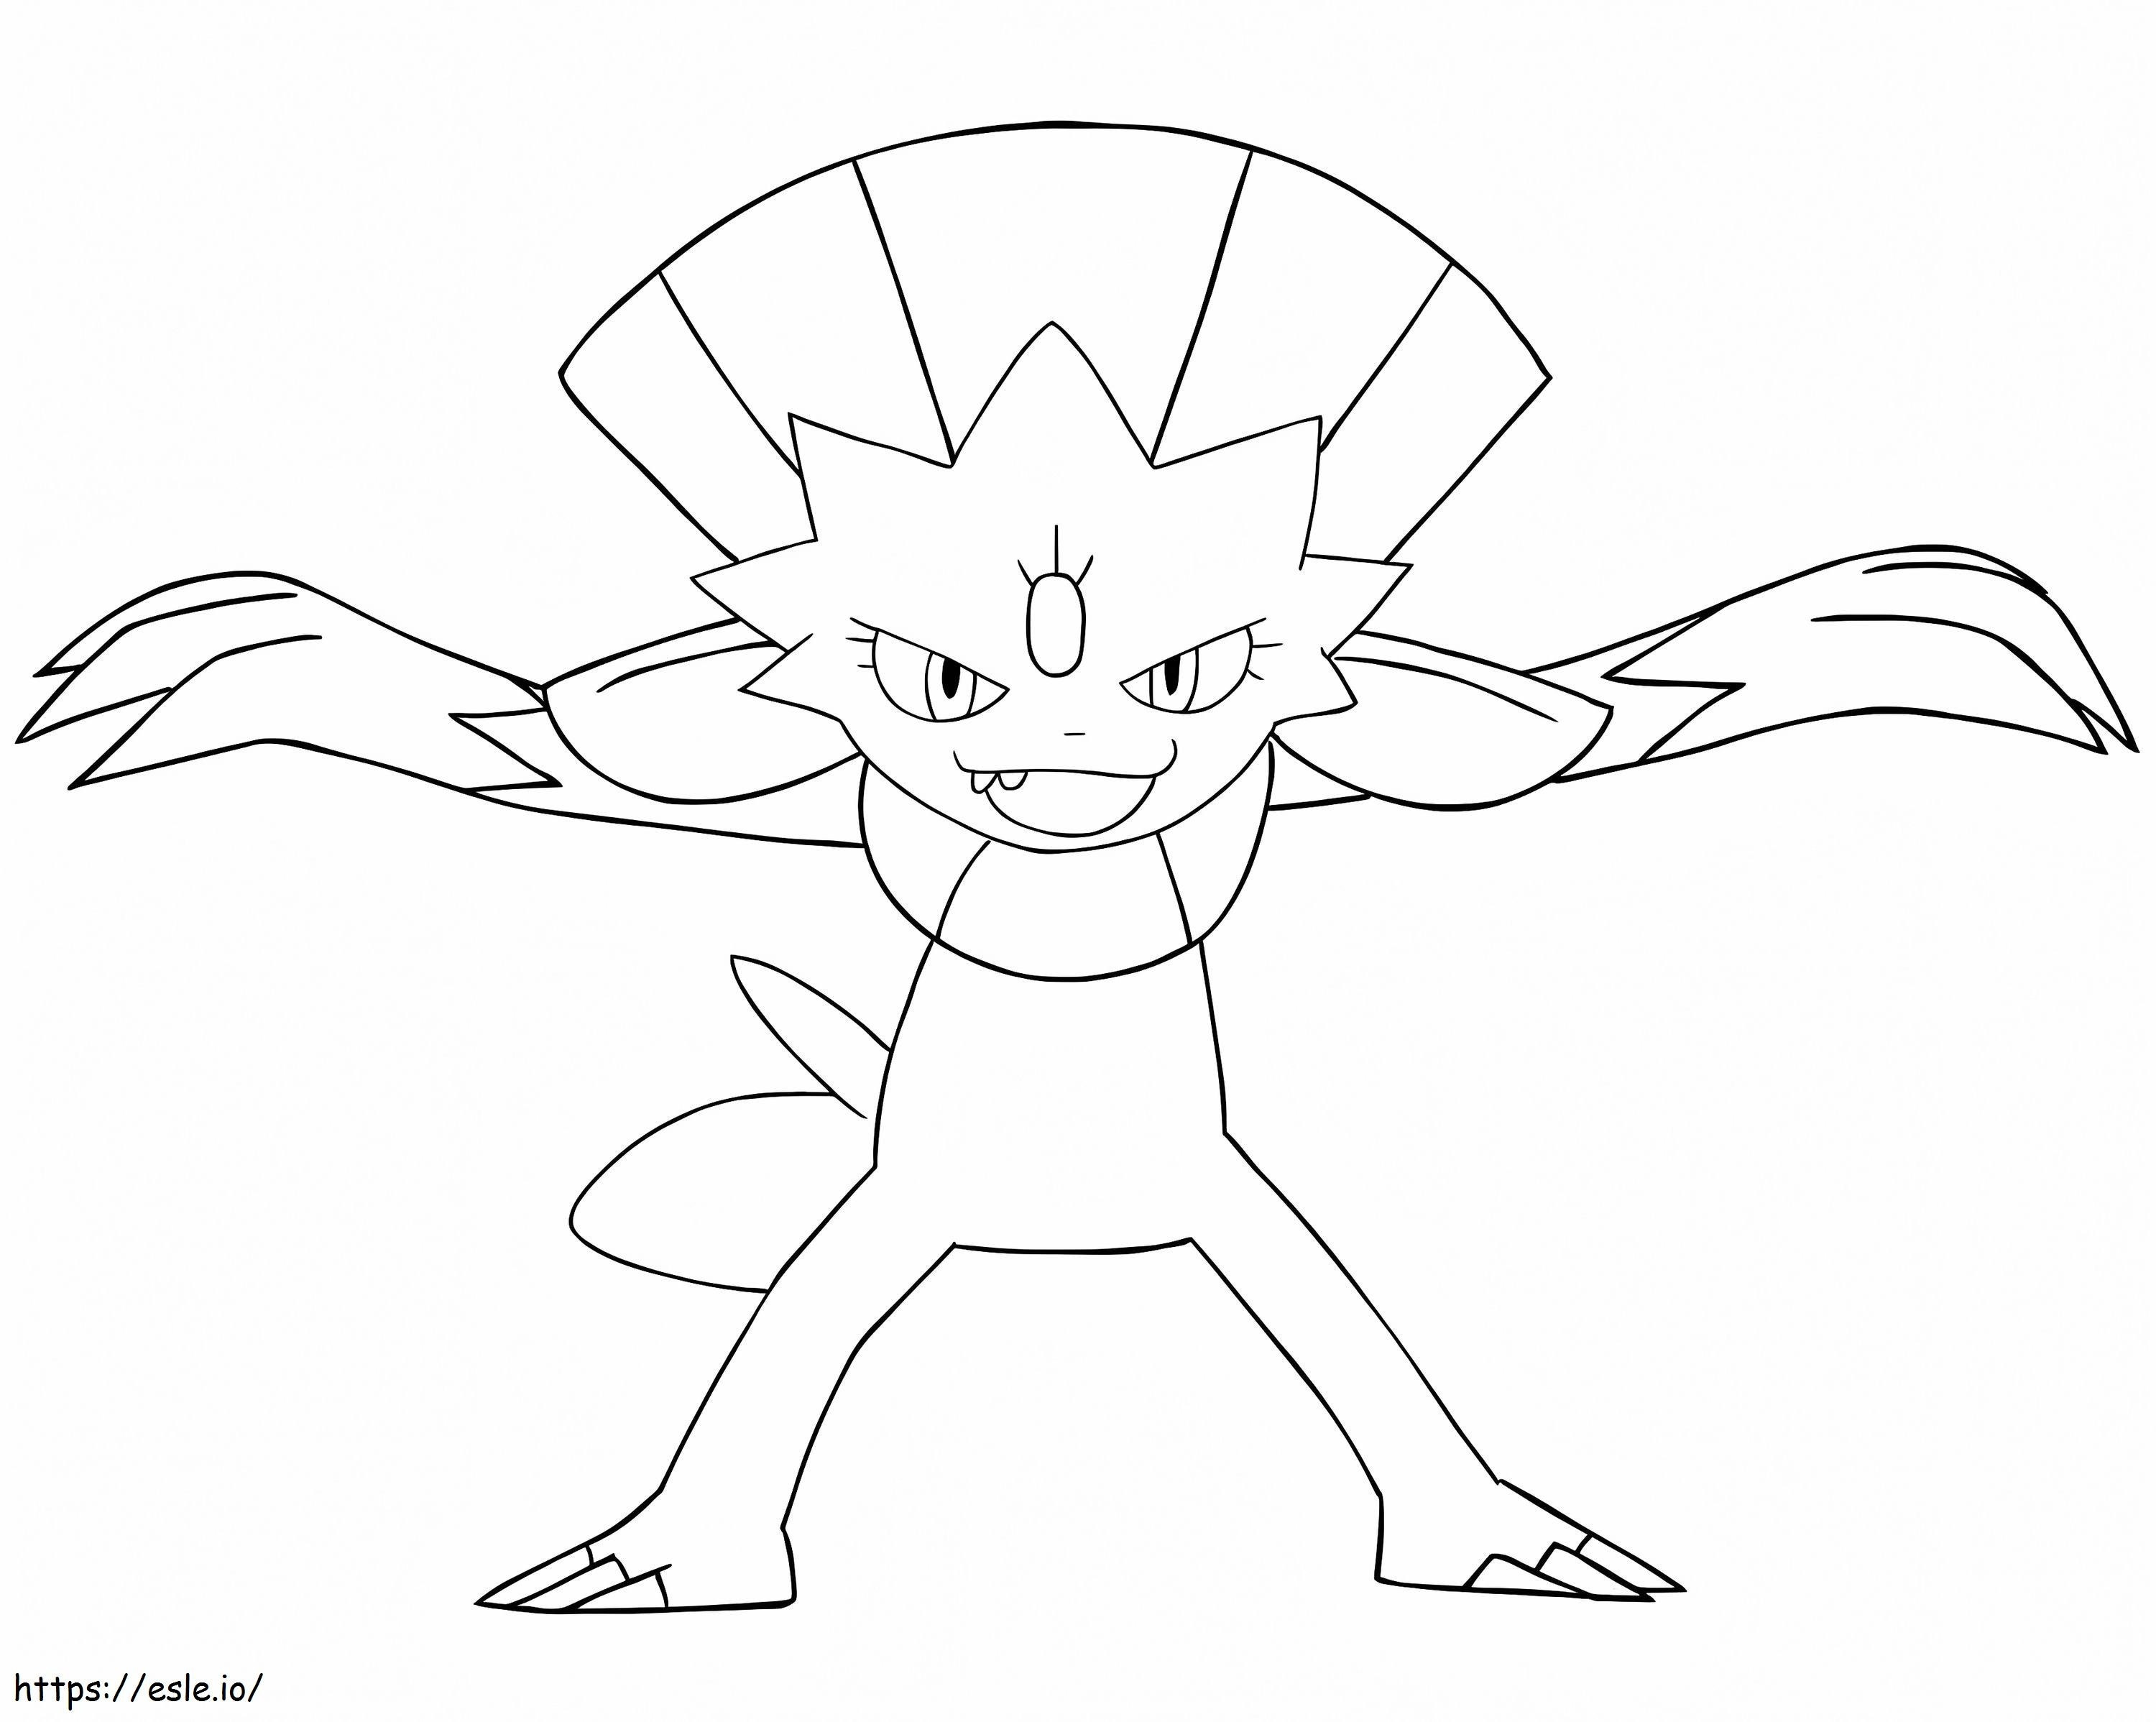 Weavile 3 coloring page